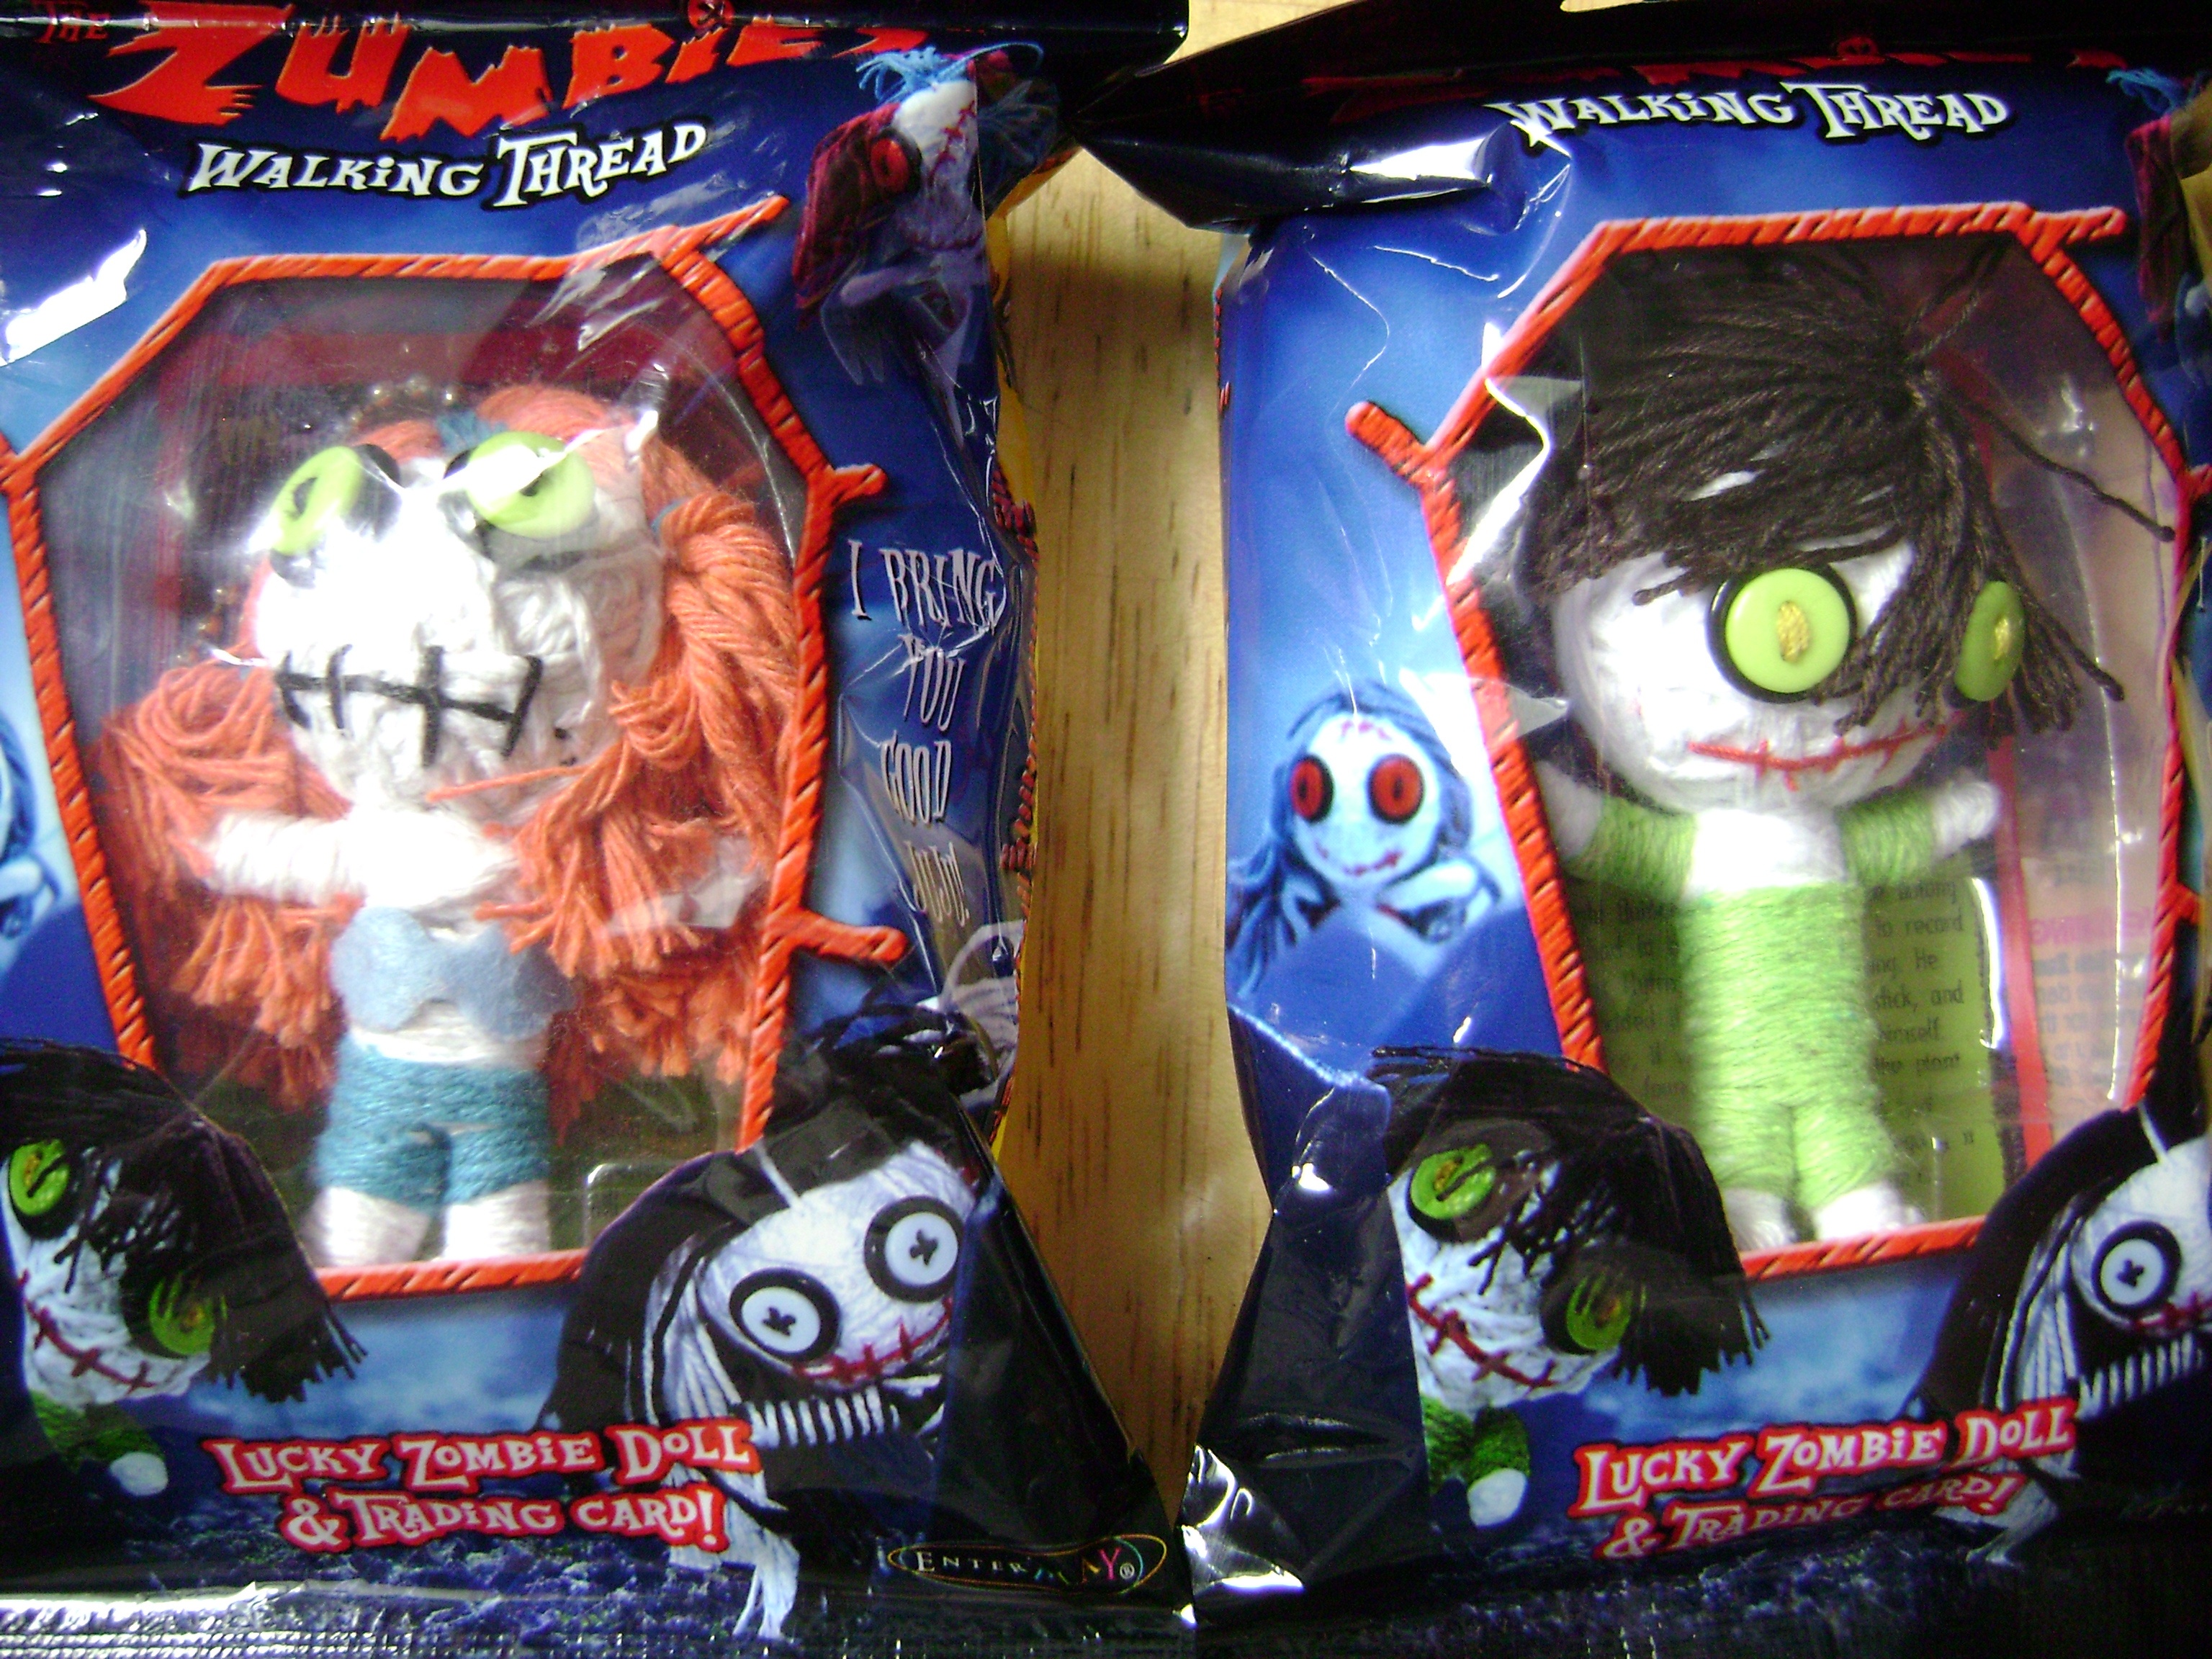 Two Zumbies: The Walking Thread toy packs featuring adorable zombie dolls with vibrant hair and googly eyes, each including a trading card.